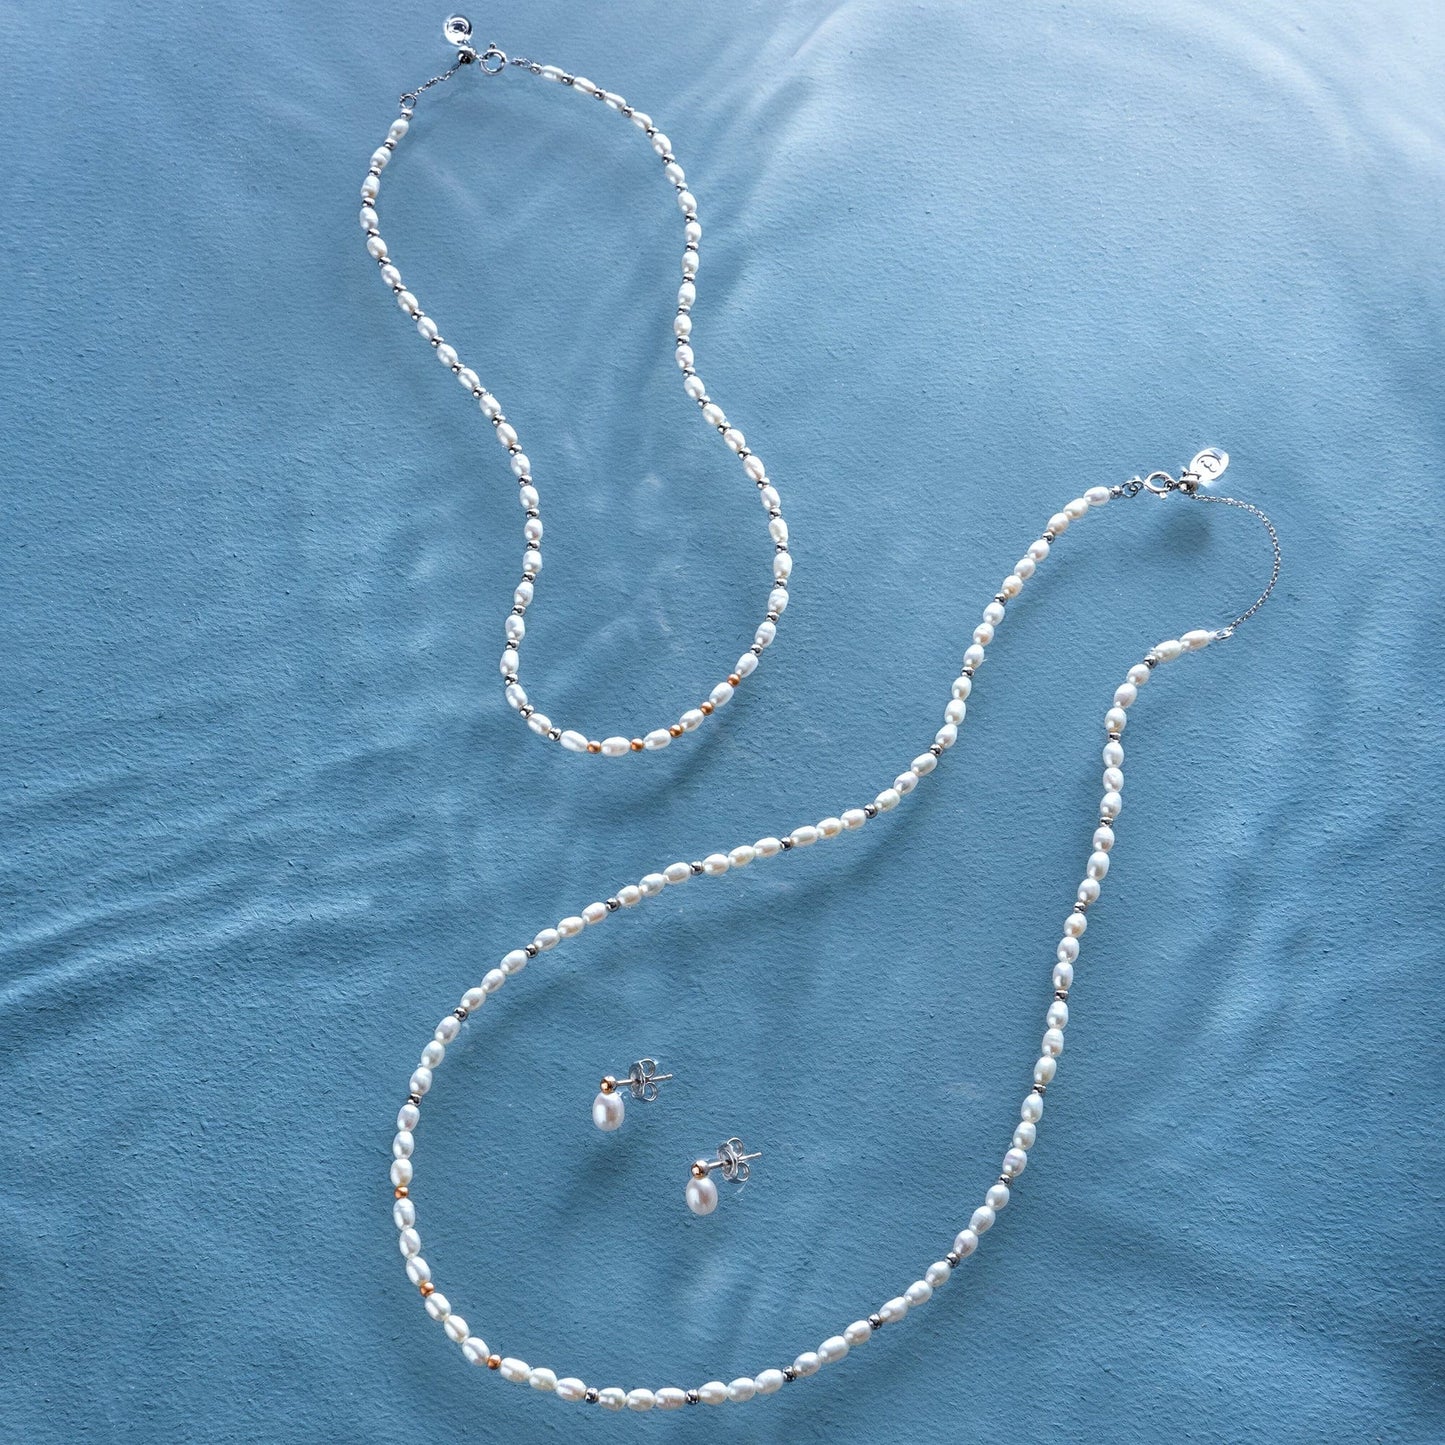 Beachcomber Silver and Pearl Necklace